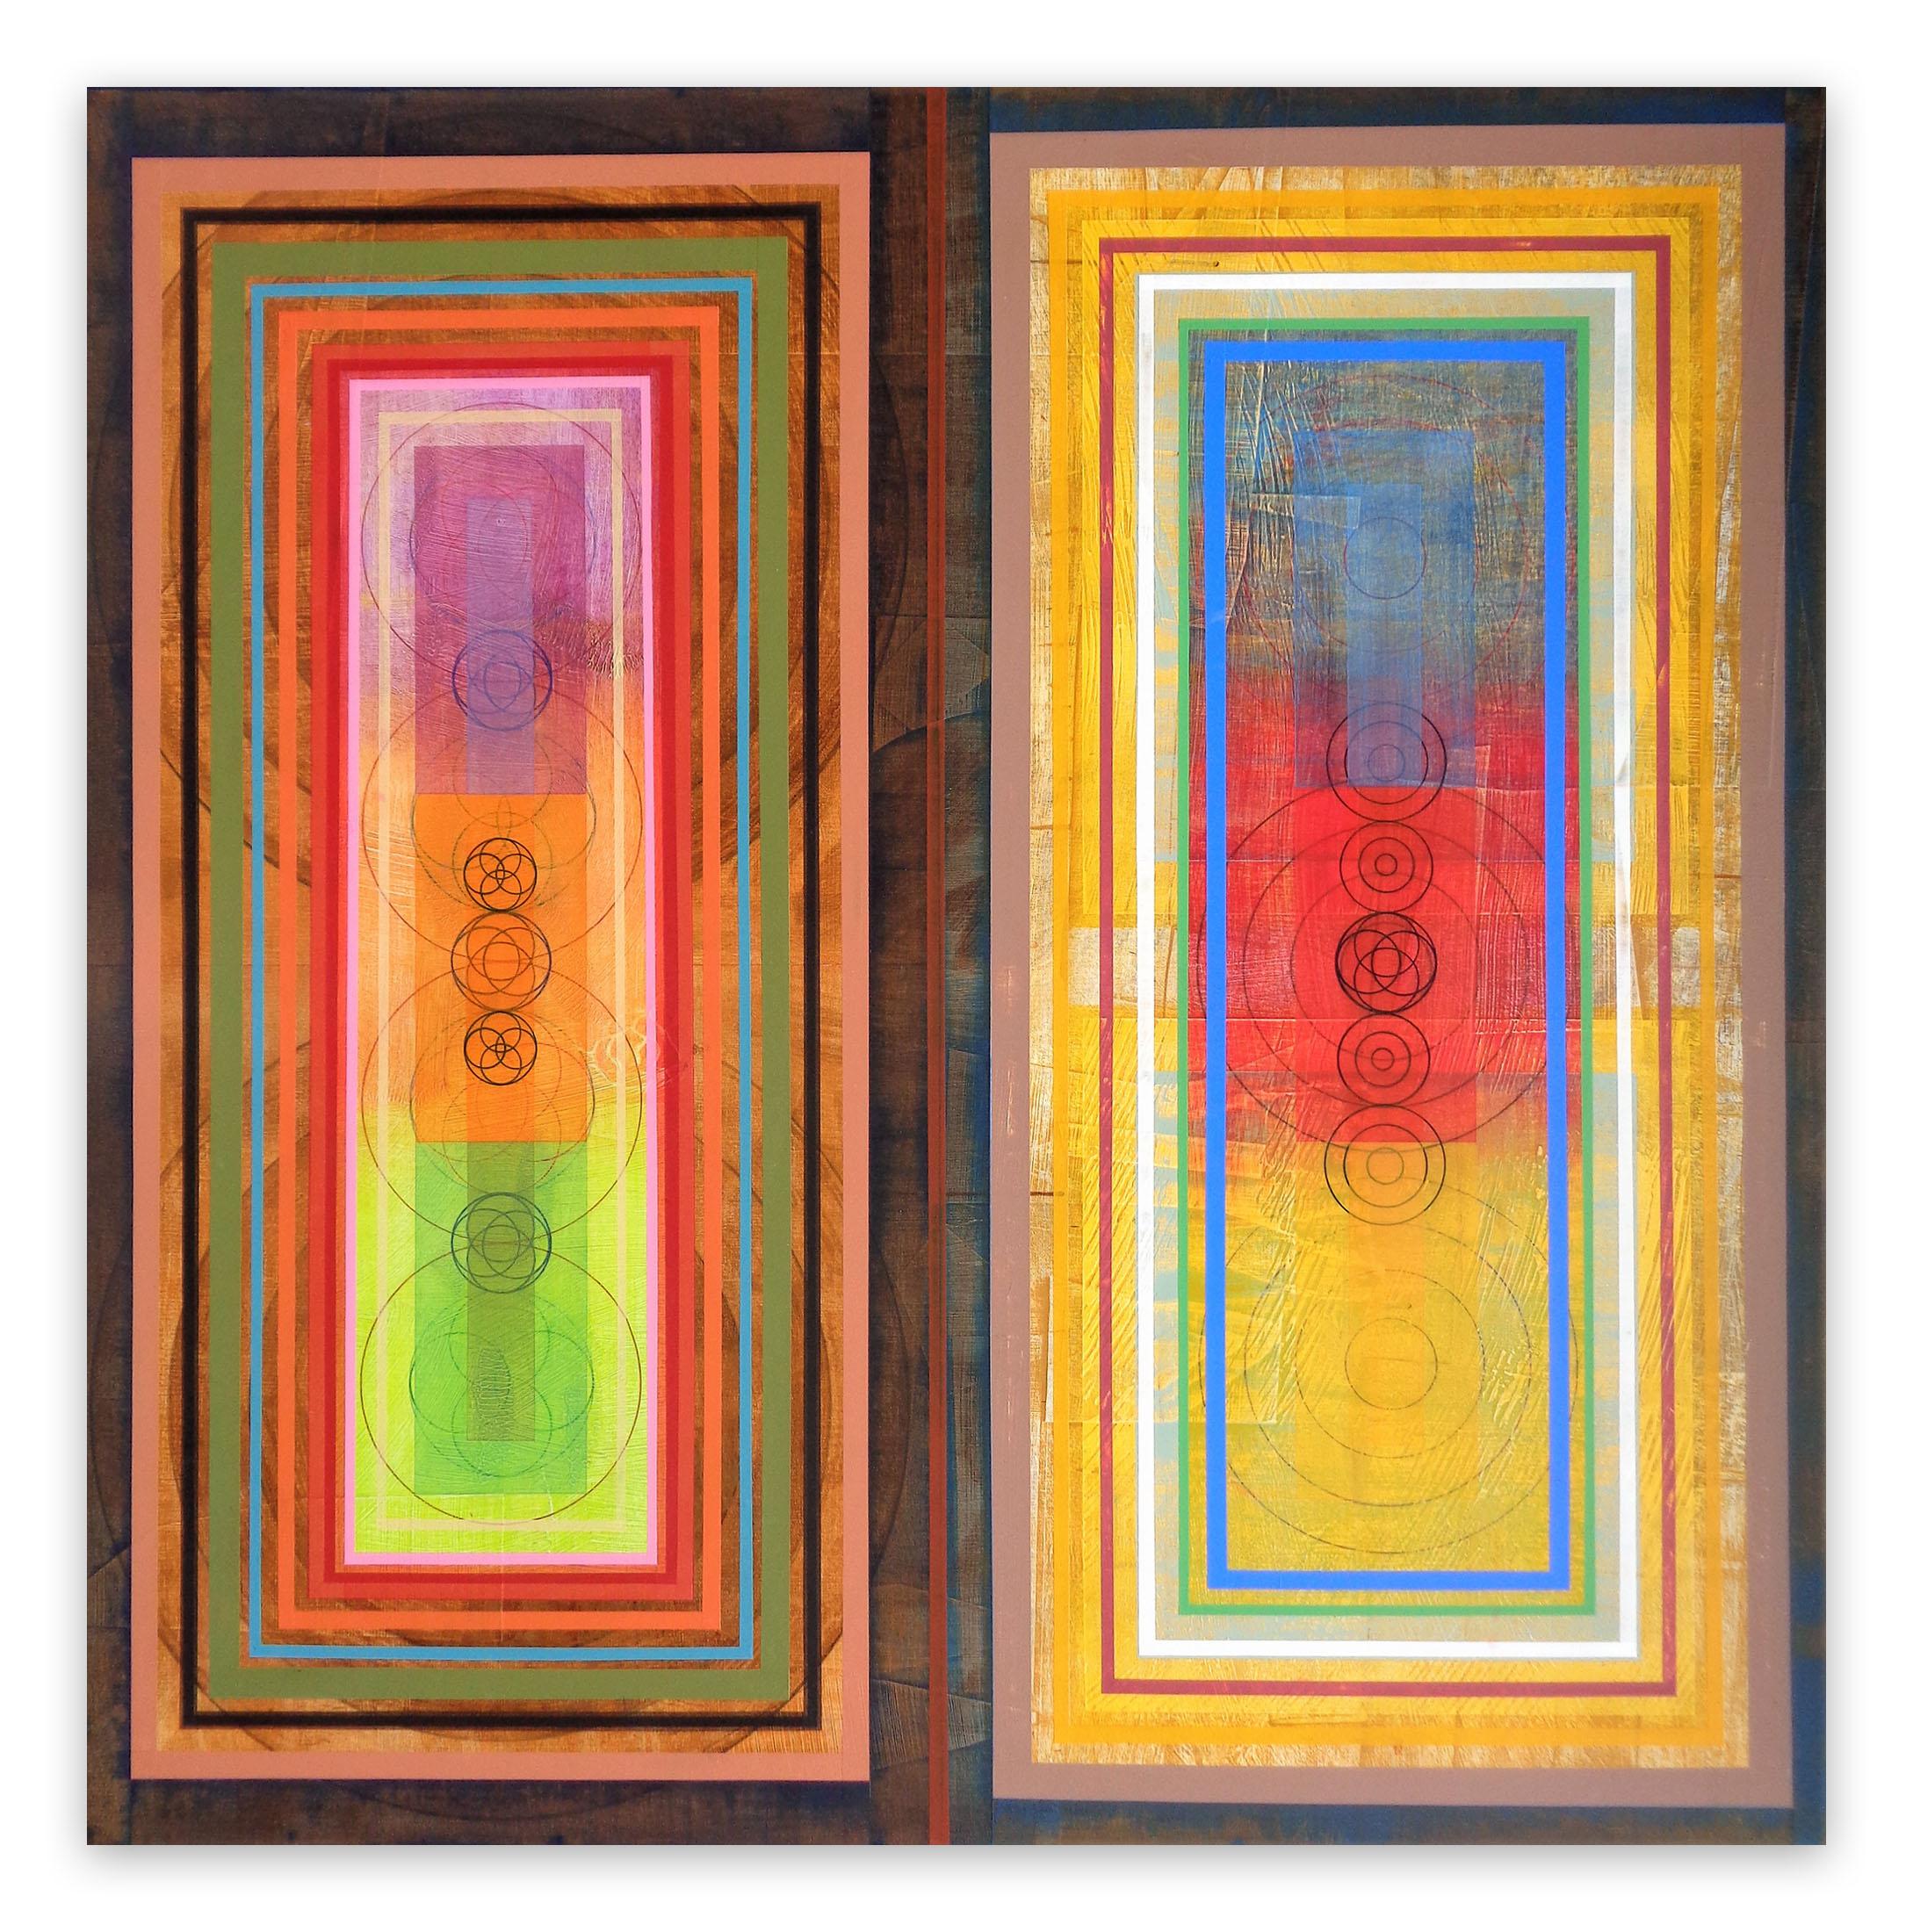 Organic Geometry (Cathedral), (Abstract Painting)

Mixed media on canvas panels - Unframed

Artwork exclusive to IdeelArt.

In this series, Michael Barringer wants to make deeply felt, poetic images, but bring them about by a formal system of